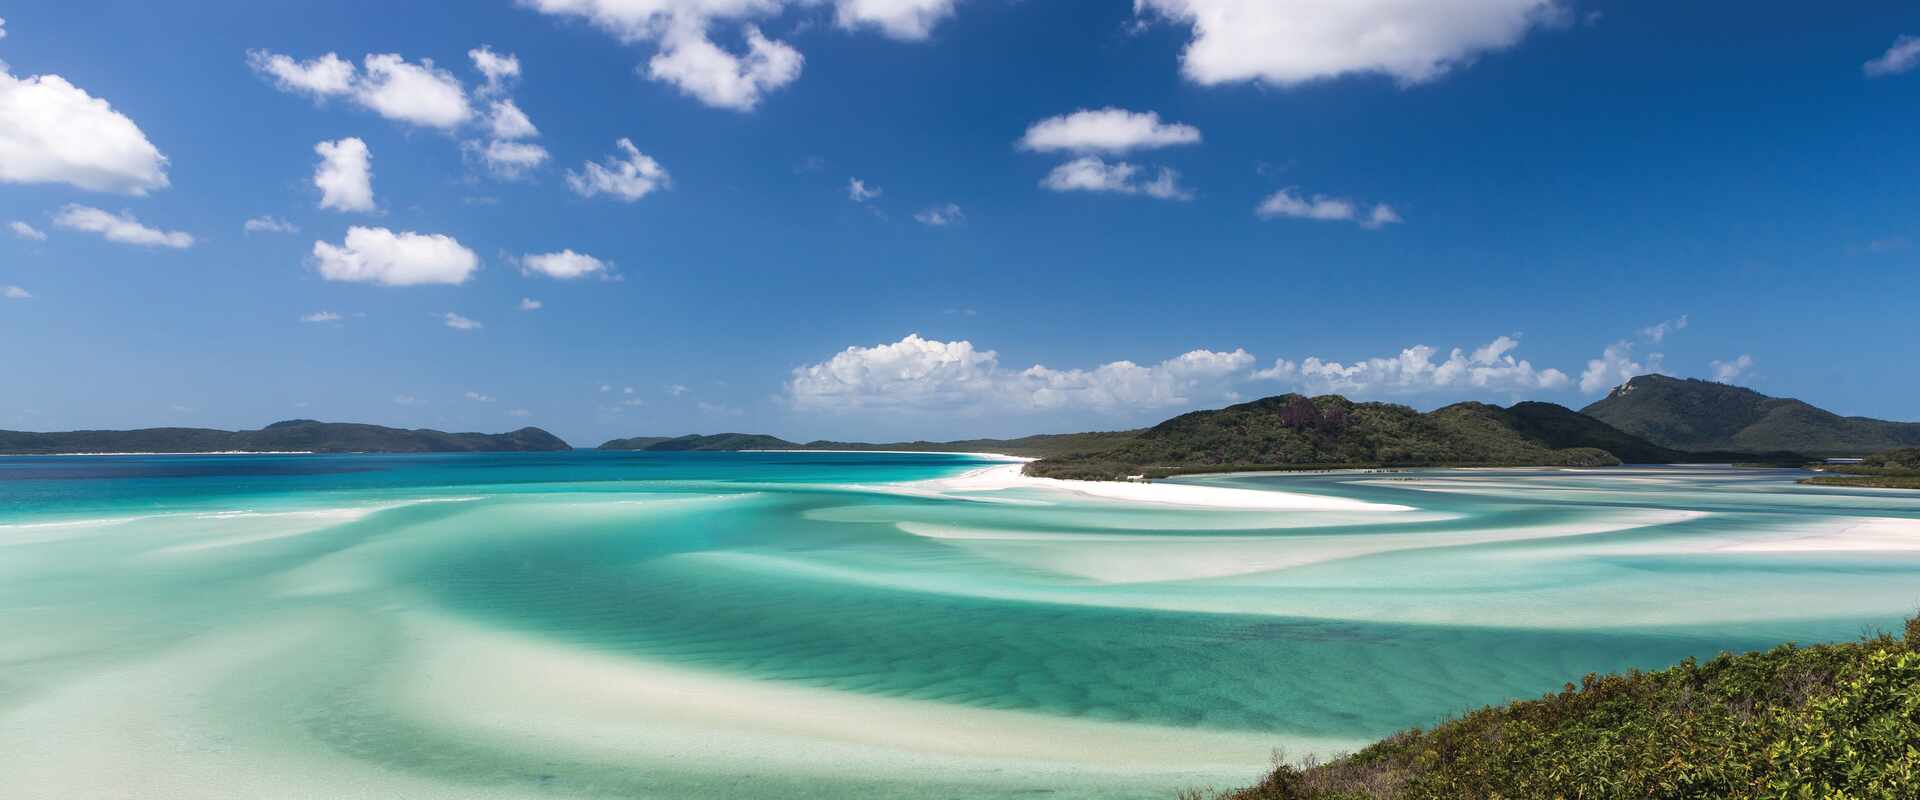 Image of Whitsundays Water and Islands